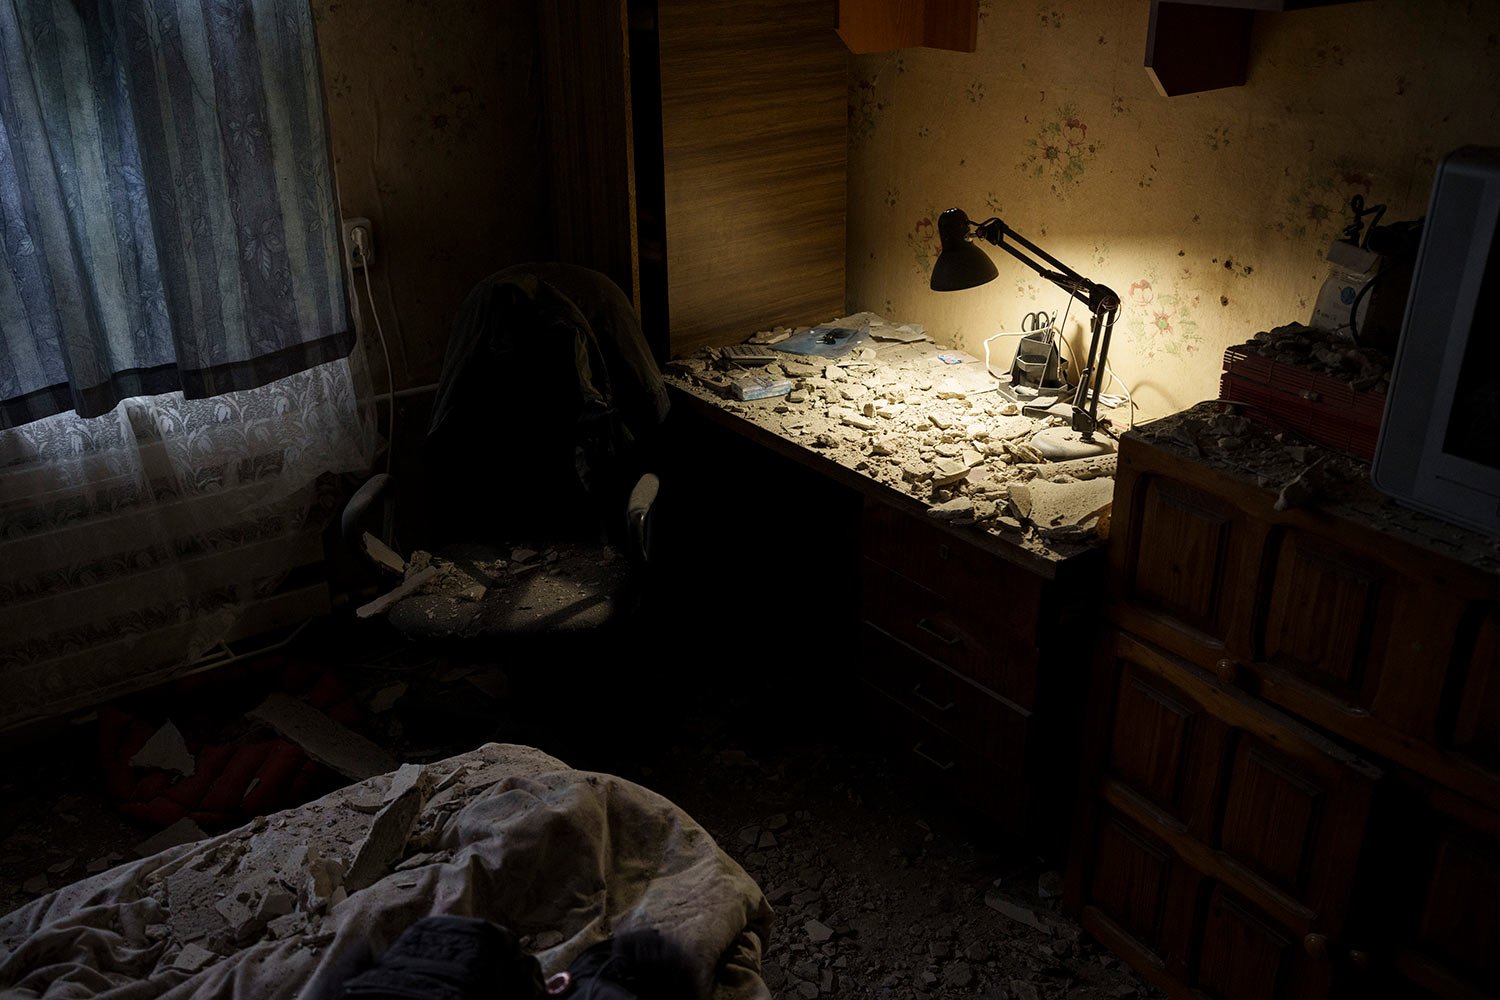  Debris covers a bedroom damaged after a Russian attack destroyed a building across the street, in Kharkiv, Ukraine, Tuesday, April 12, 2022. (AP Photo/Felipe Dana) 